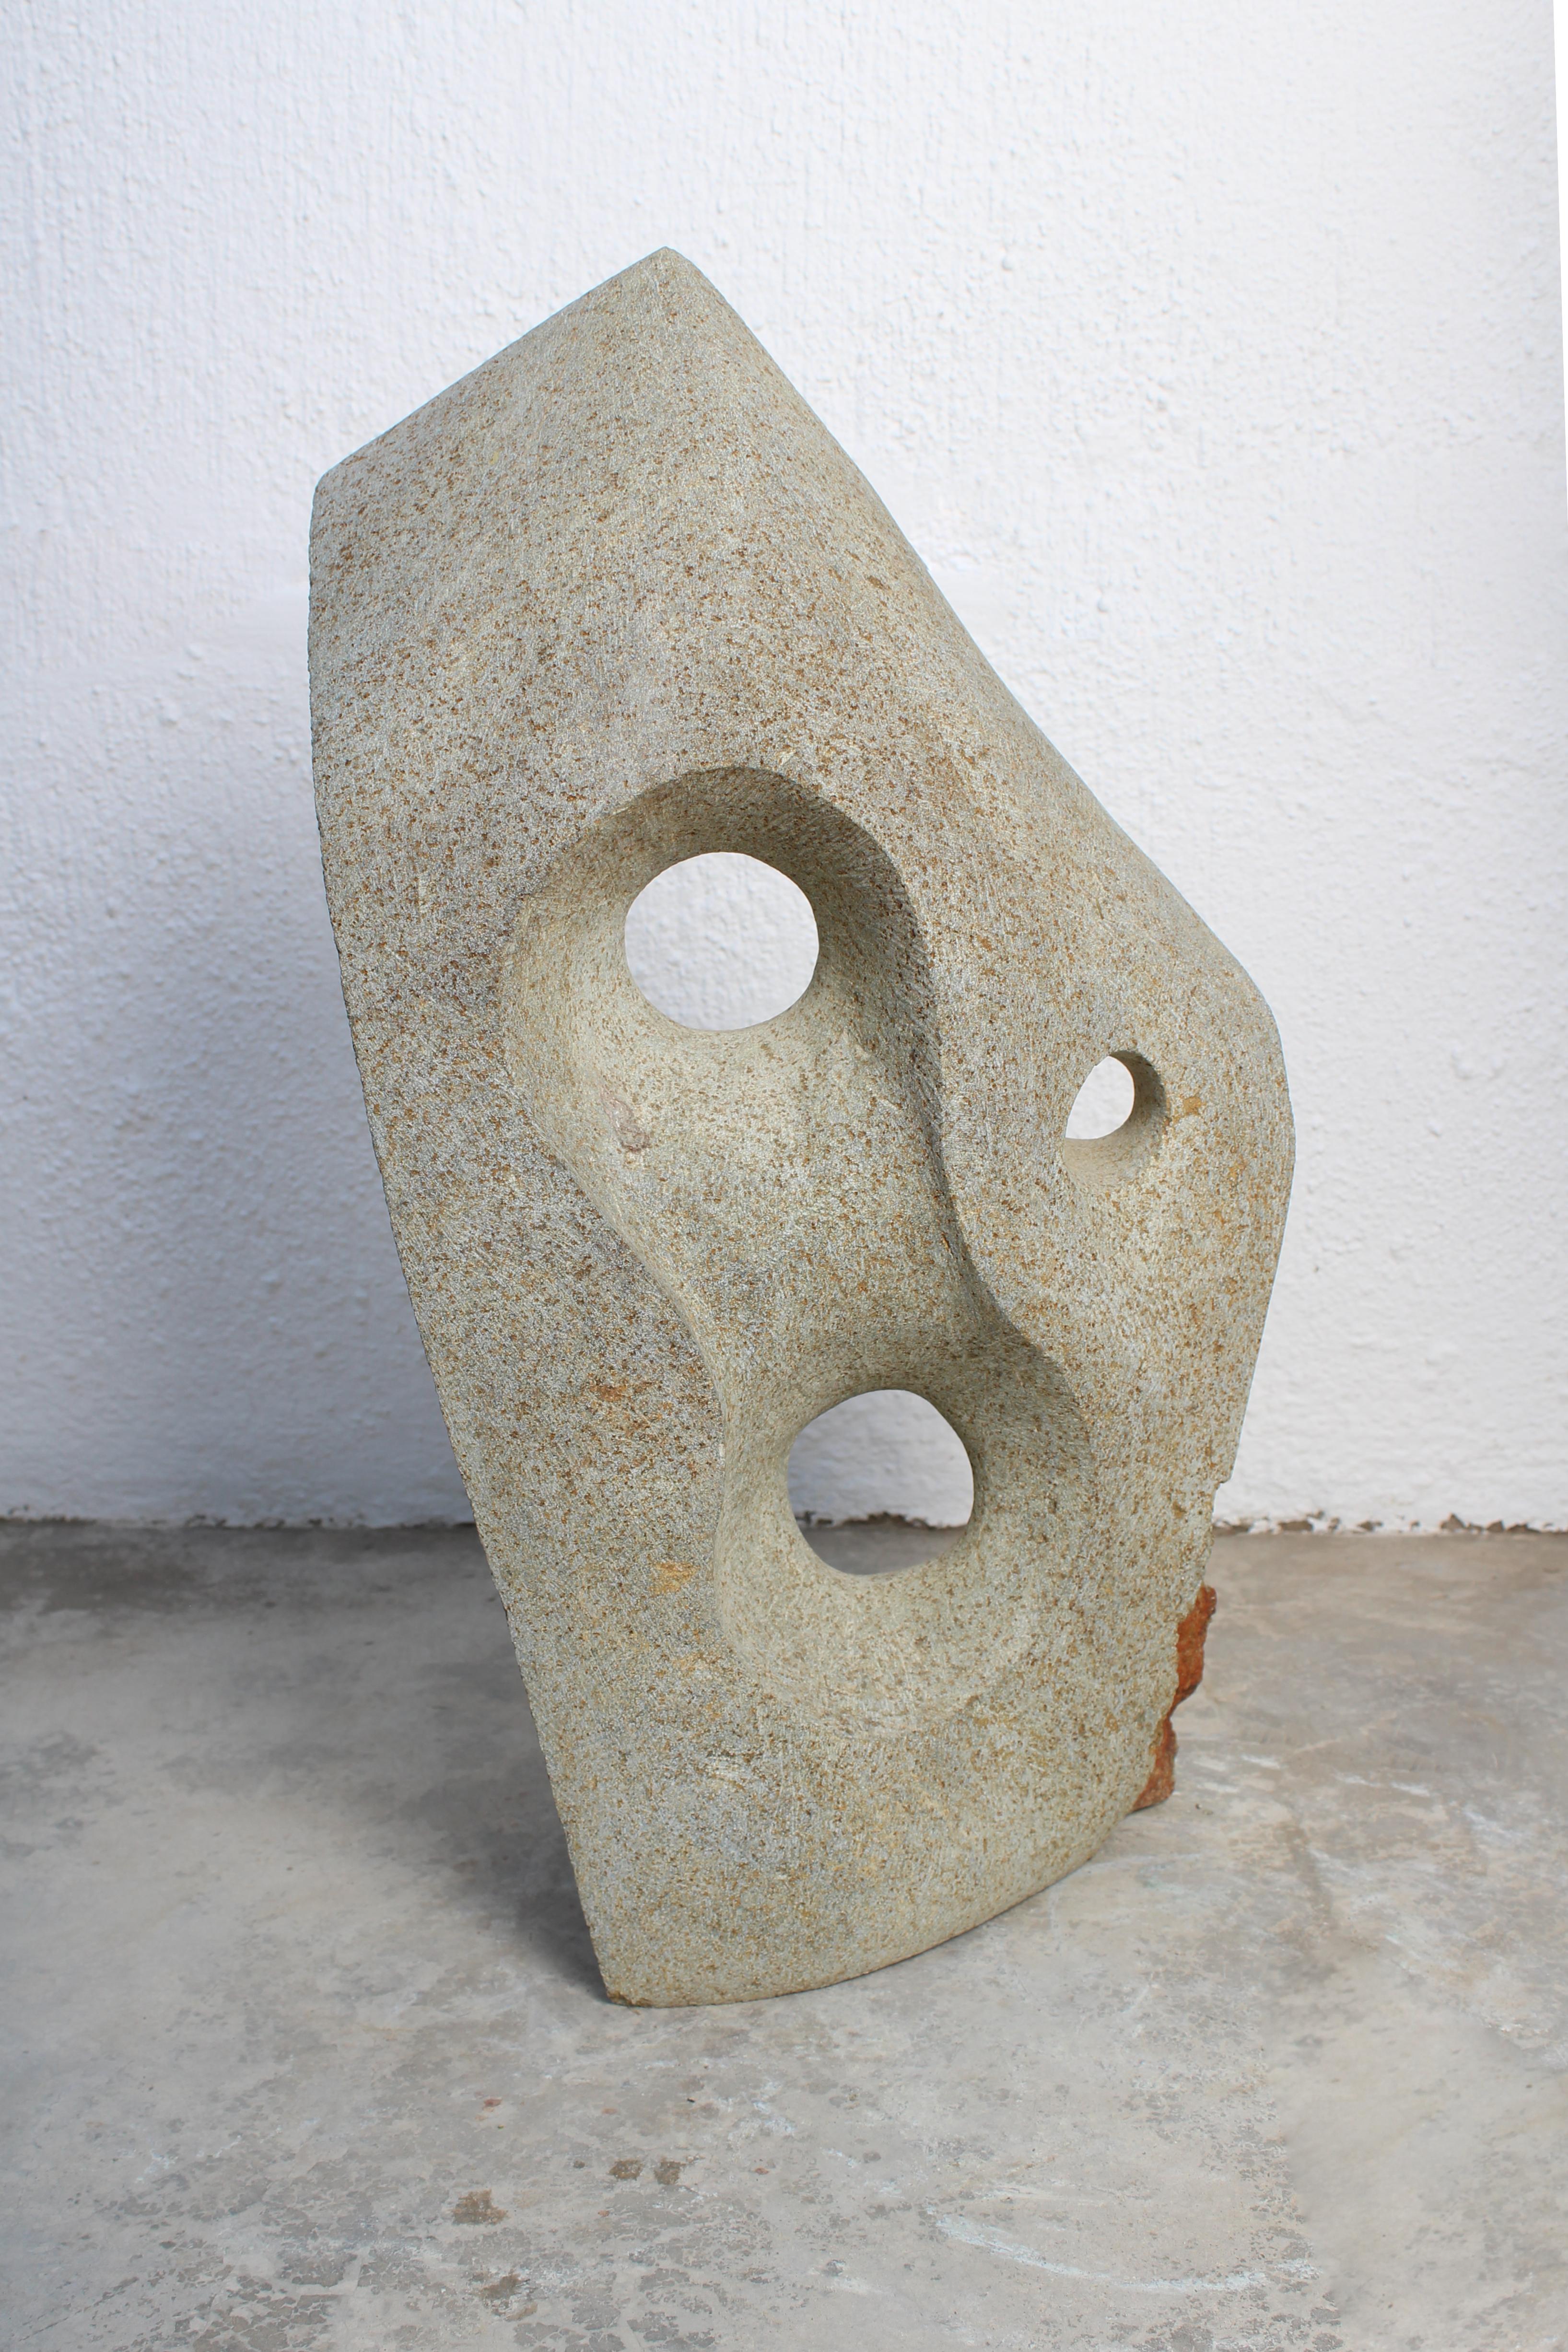 Anthill by Ismael Shivute, hand carved Namibian soapstone For Sale 3